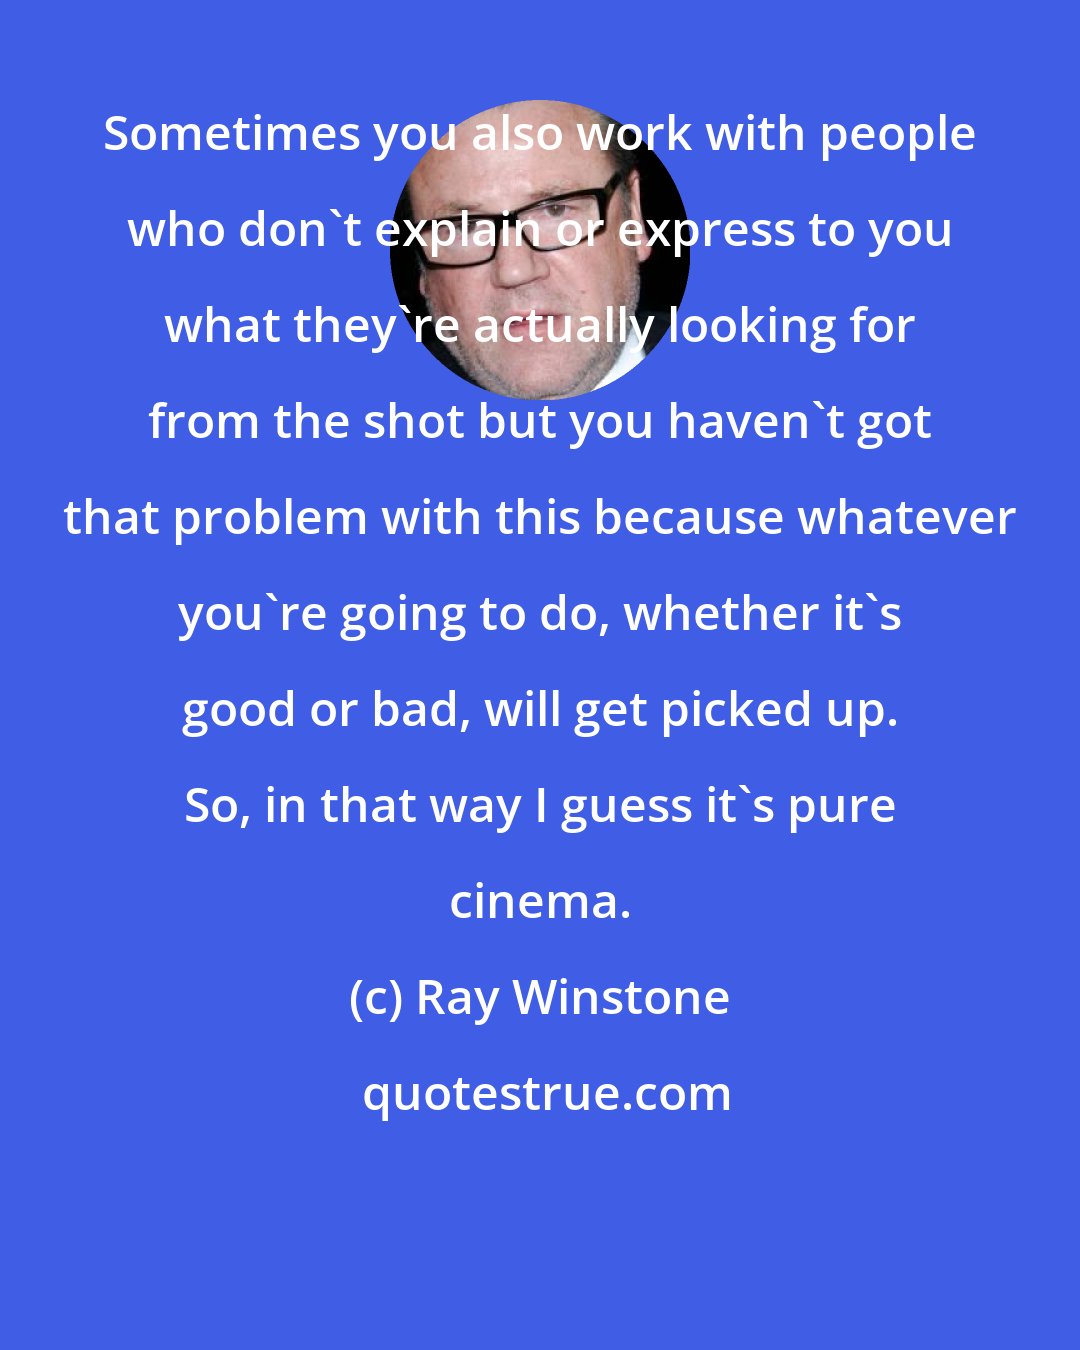 Ray Winstone: Sometimes you also work with people who don't explain or express to you what they're actually looking for from the shot but you haven't got that problem with this because whatever you're going to do, whether it's good or bad, will get picked up. So, in that way I guess it's pure cinema.